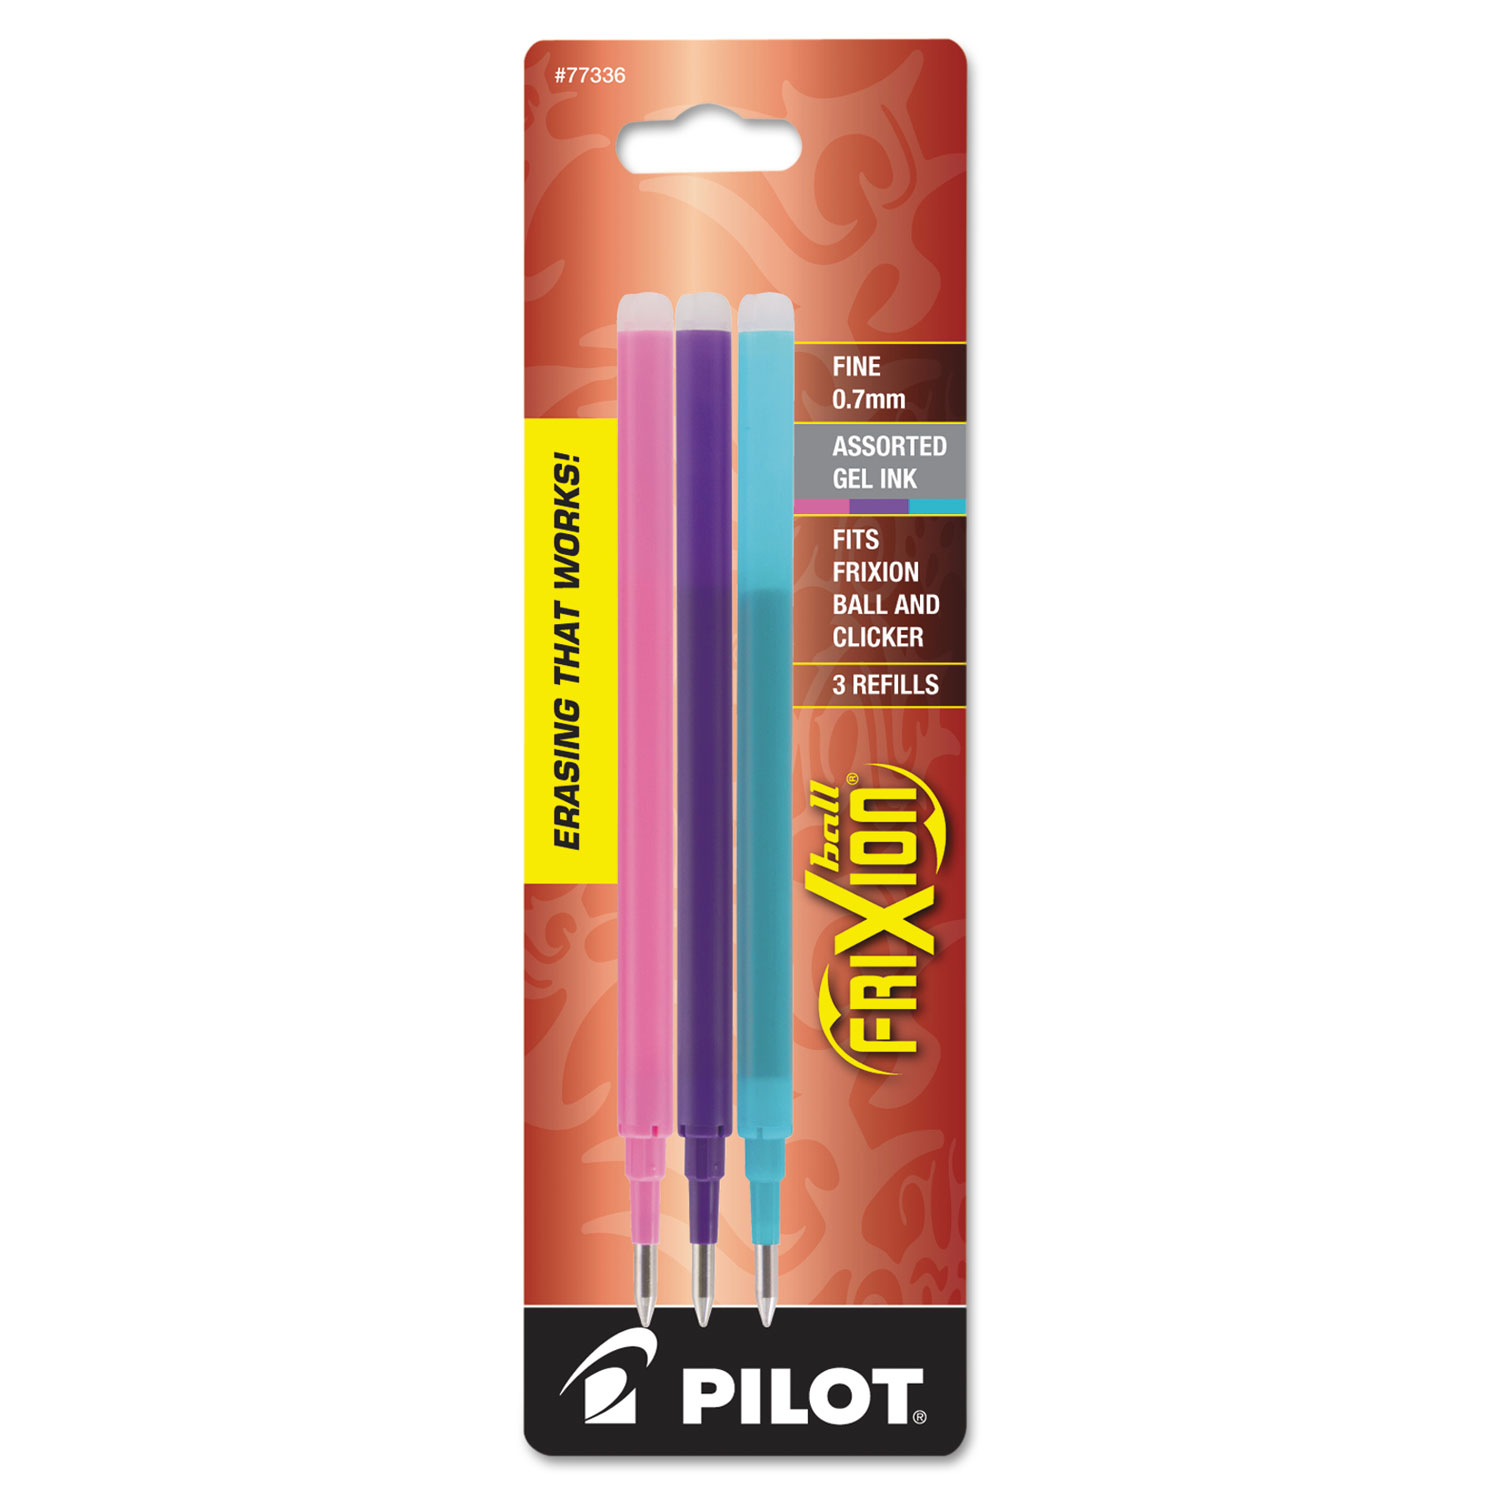 Refill for Pilot FriXion, FriXion Ball, FriXion Clicker and FriXion LX Gel Pens, Fine Point, Assorted Ink Colors, 3/Pack